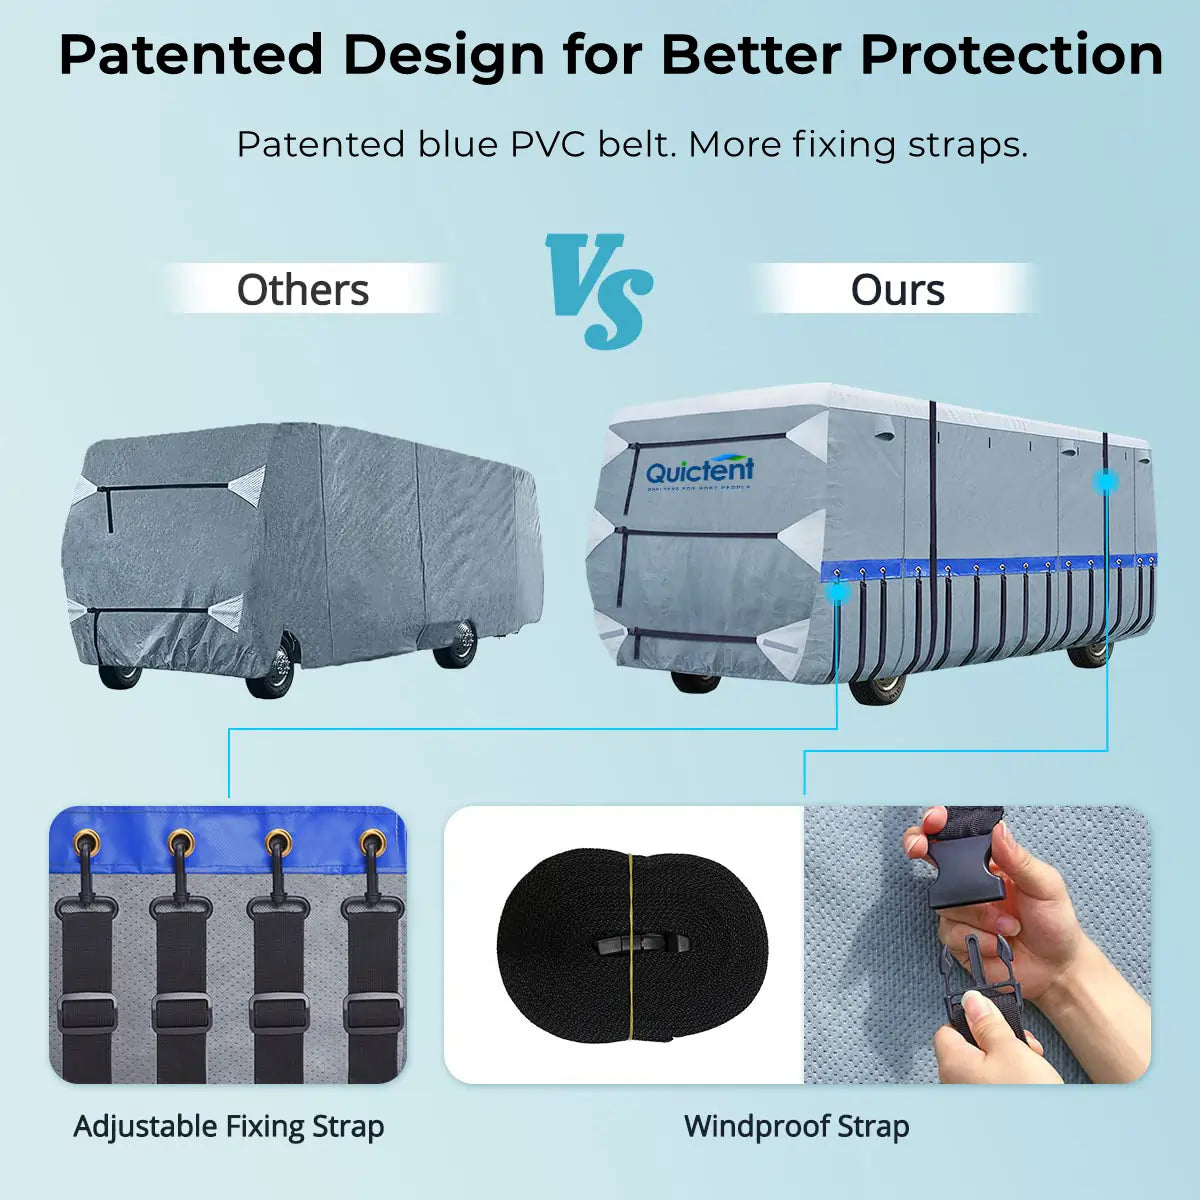 class A Patented Design for Better Protection